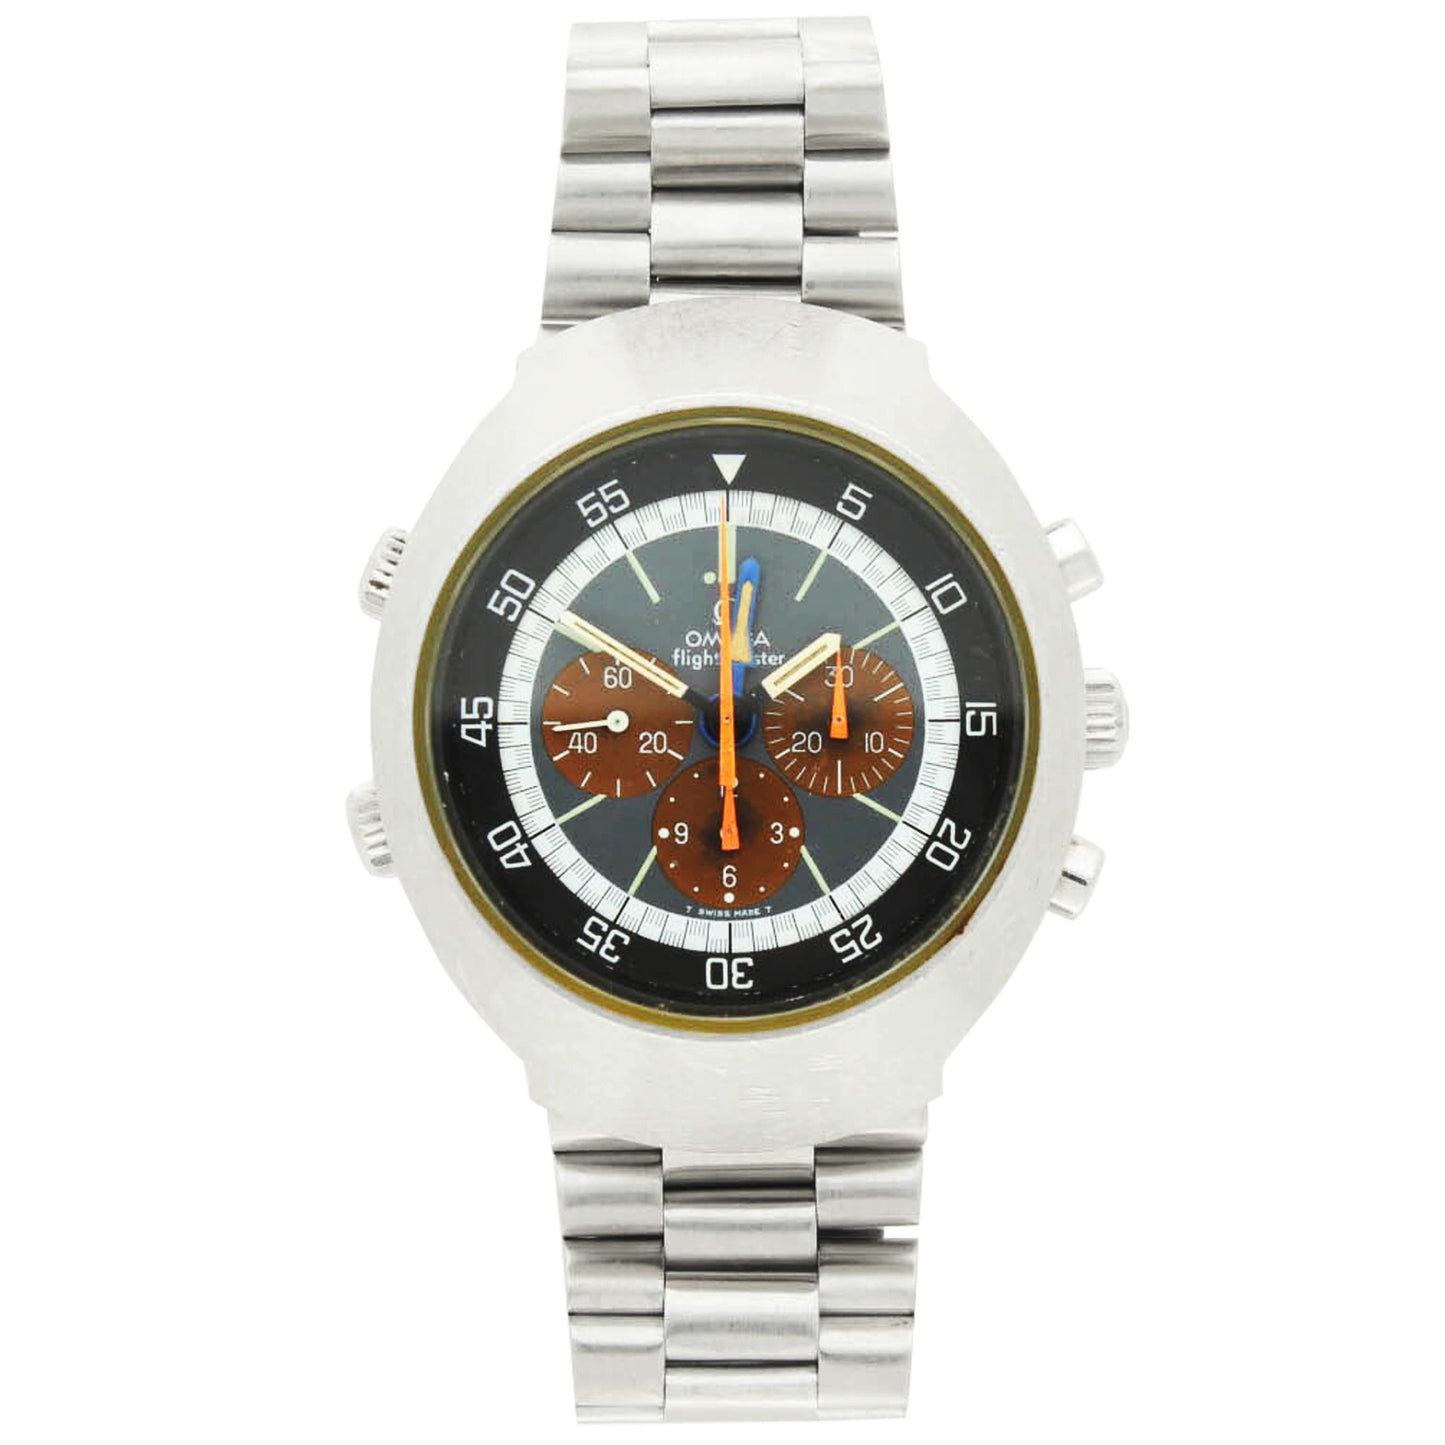 Stainless steel 2nd generation Flightmaster chronograph wristwatch. Made 1975